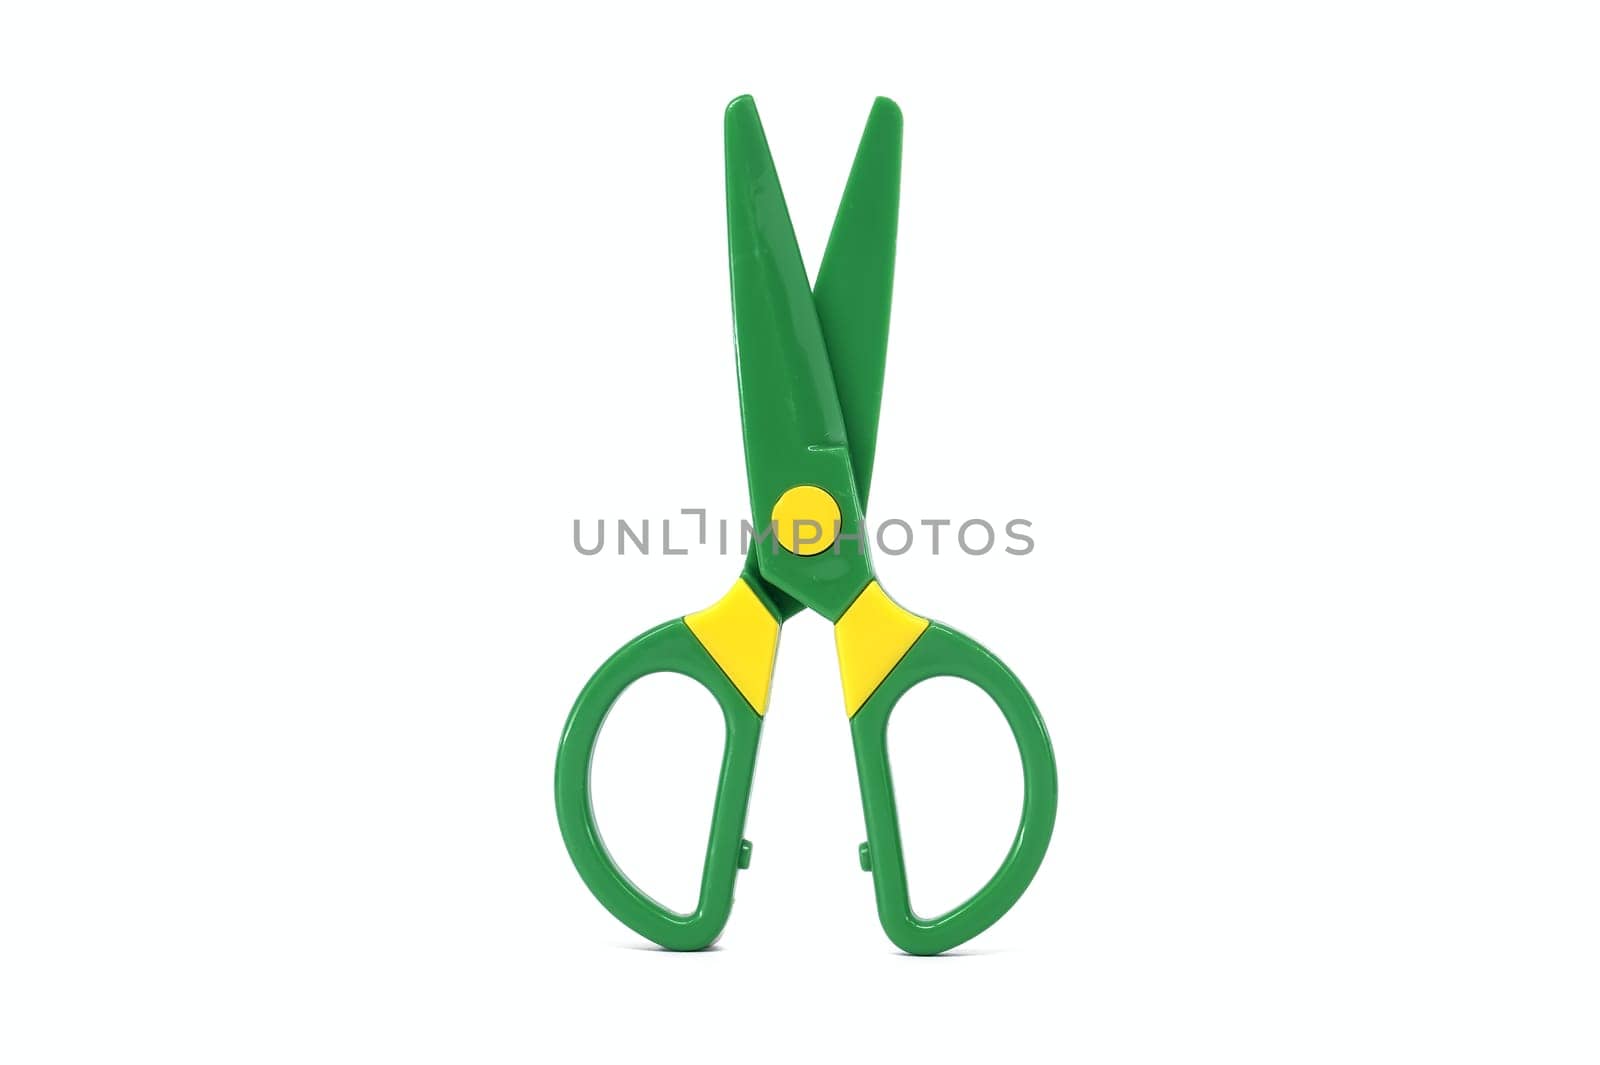 Safety plastic scissors for paper cut art craft isolated on white background by NetPix